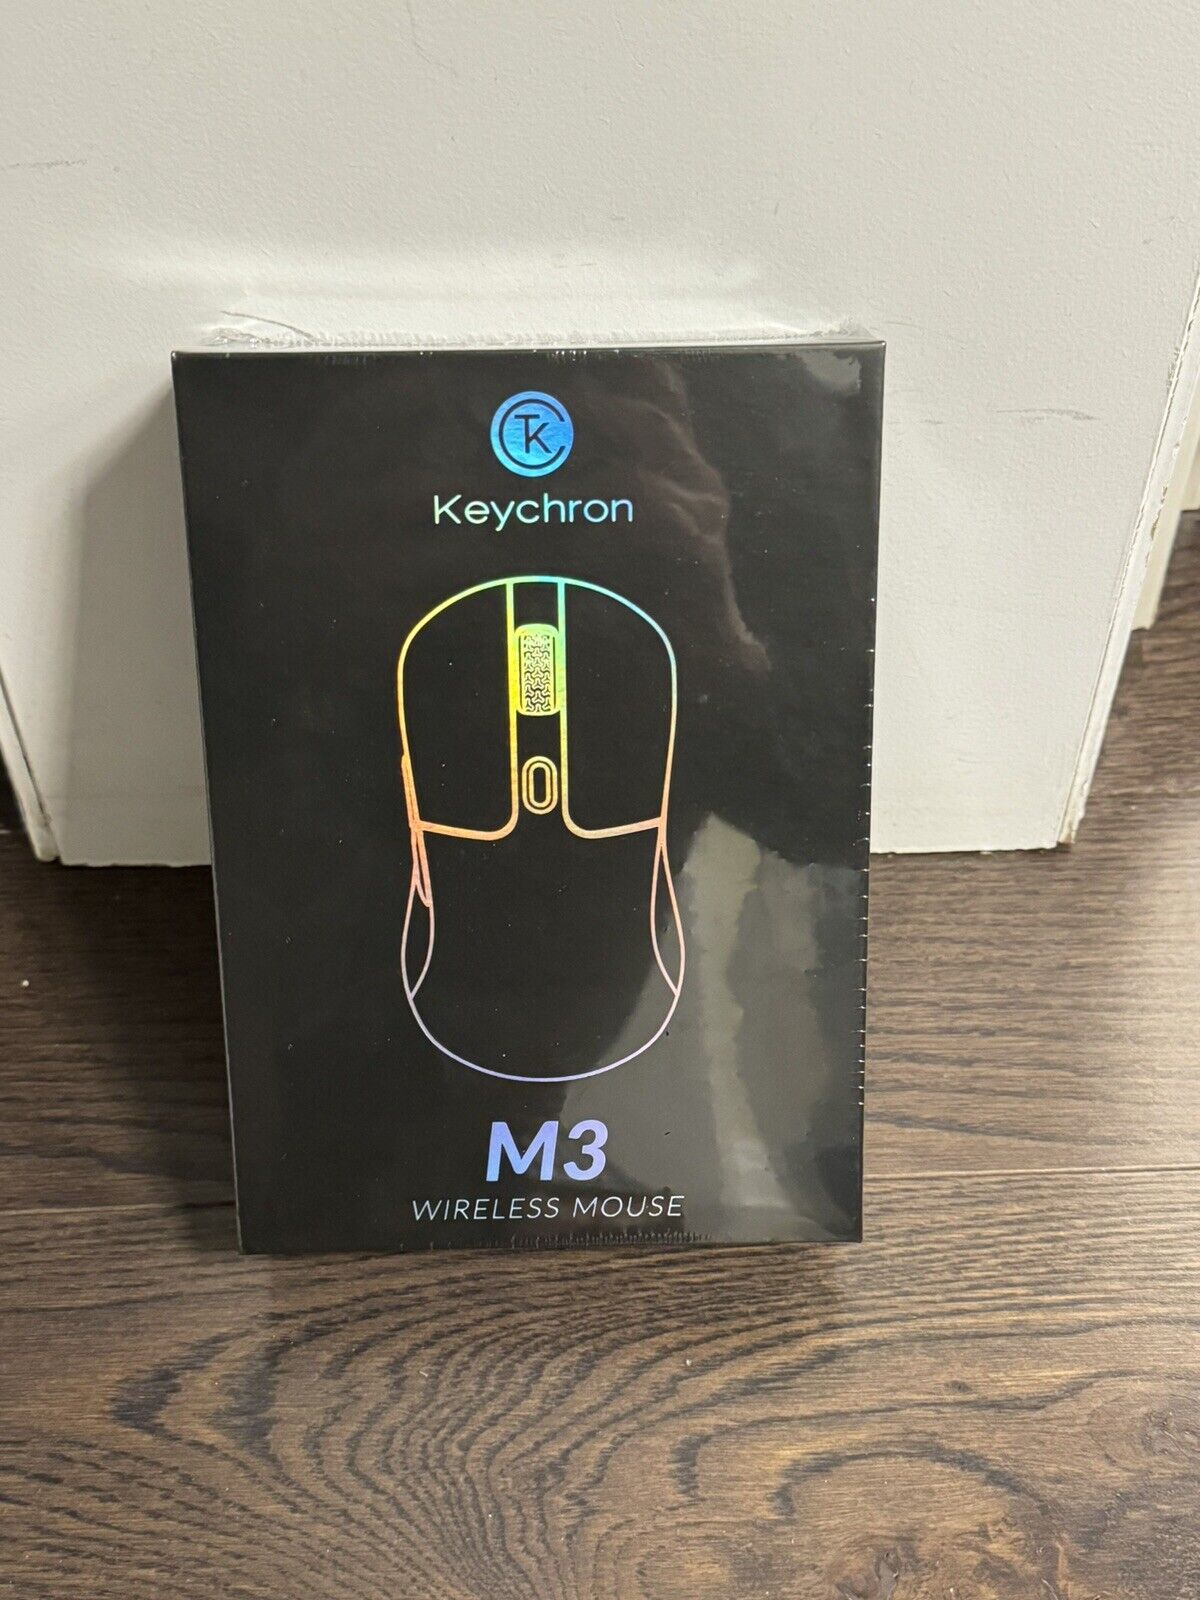 Keychron M3 2.4GHz & Bluetooth Wireless Optical Mouse Type-C Wired Mice